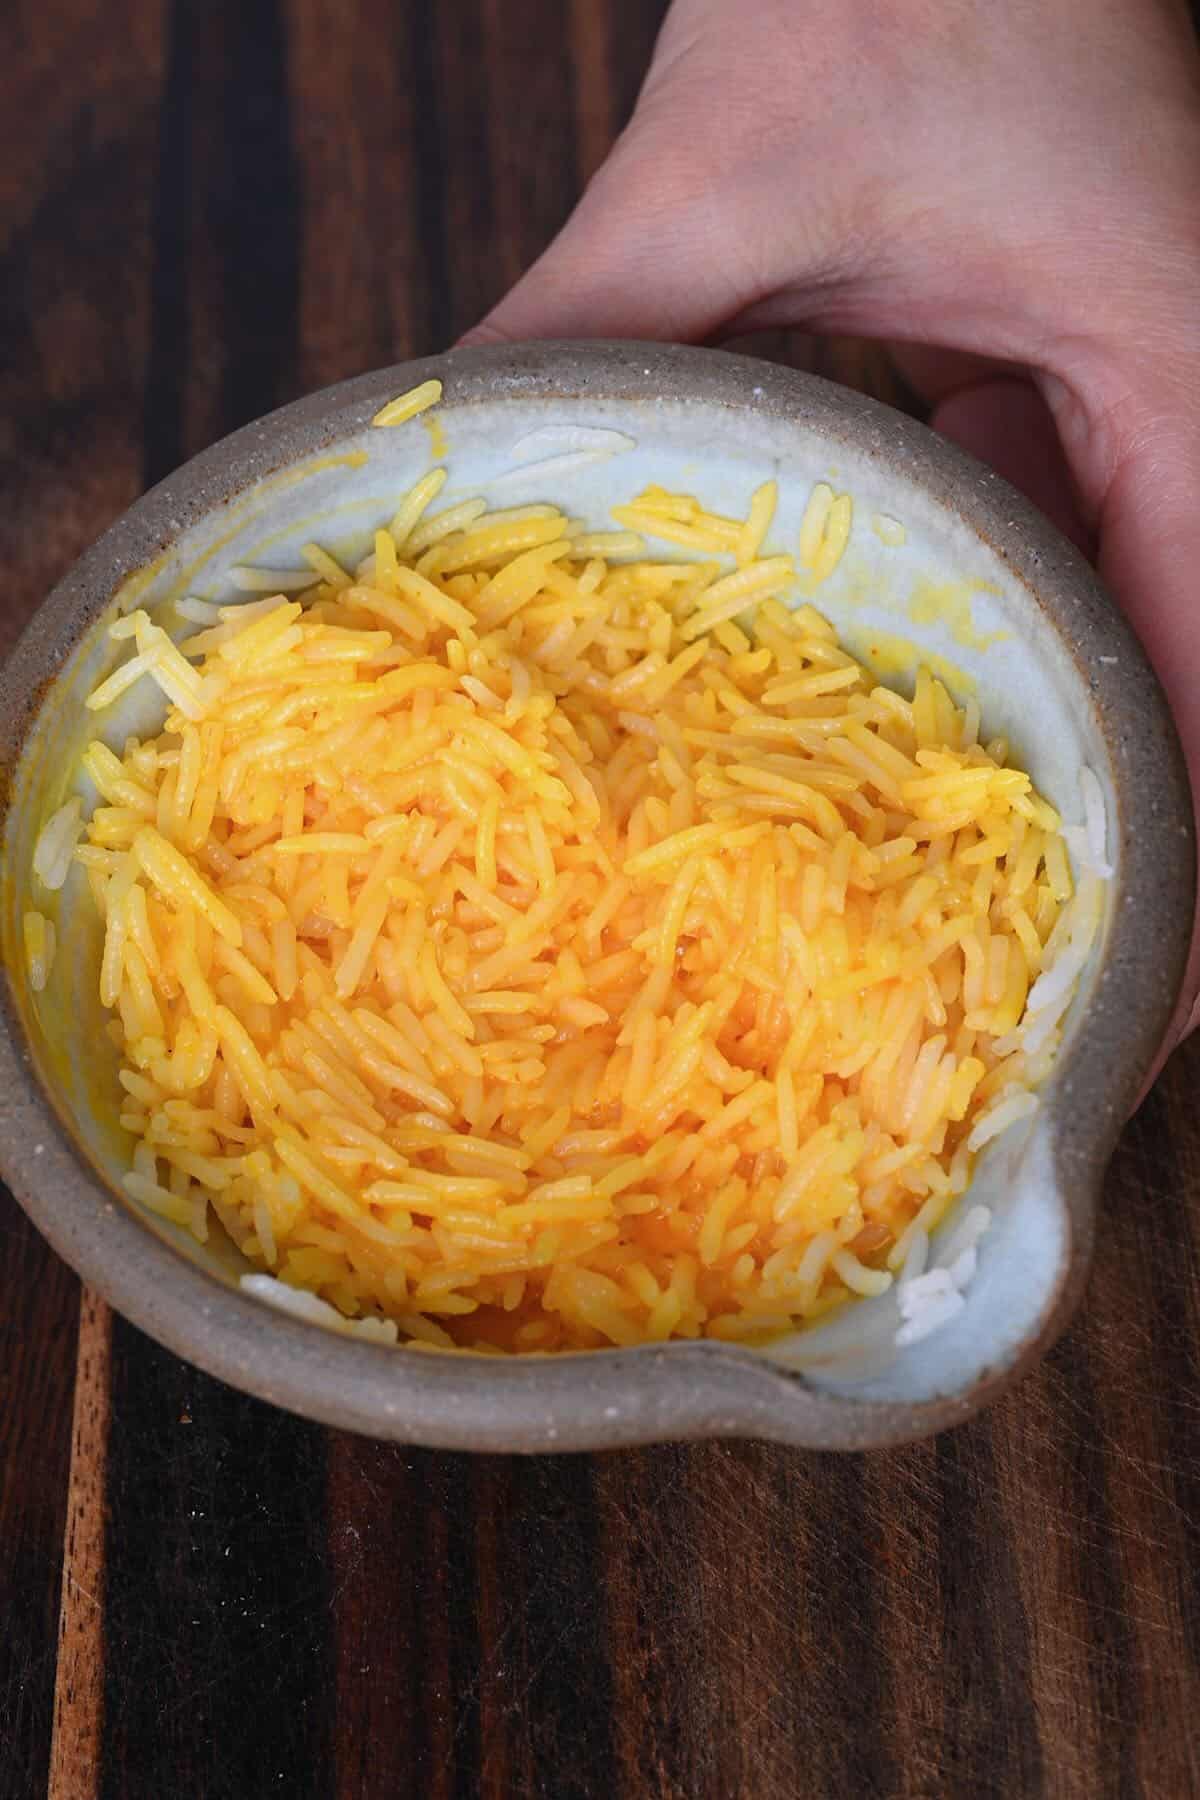 Mixing rice with yolk mixture